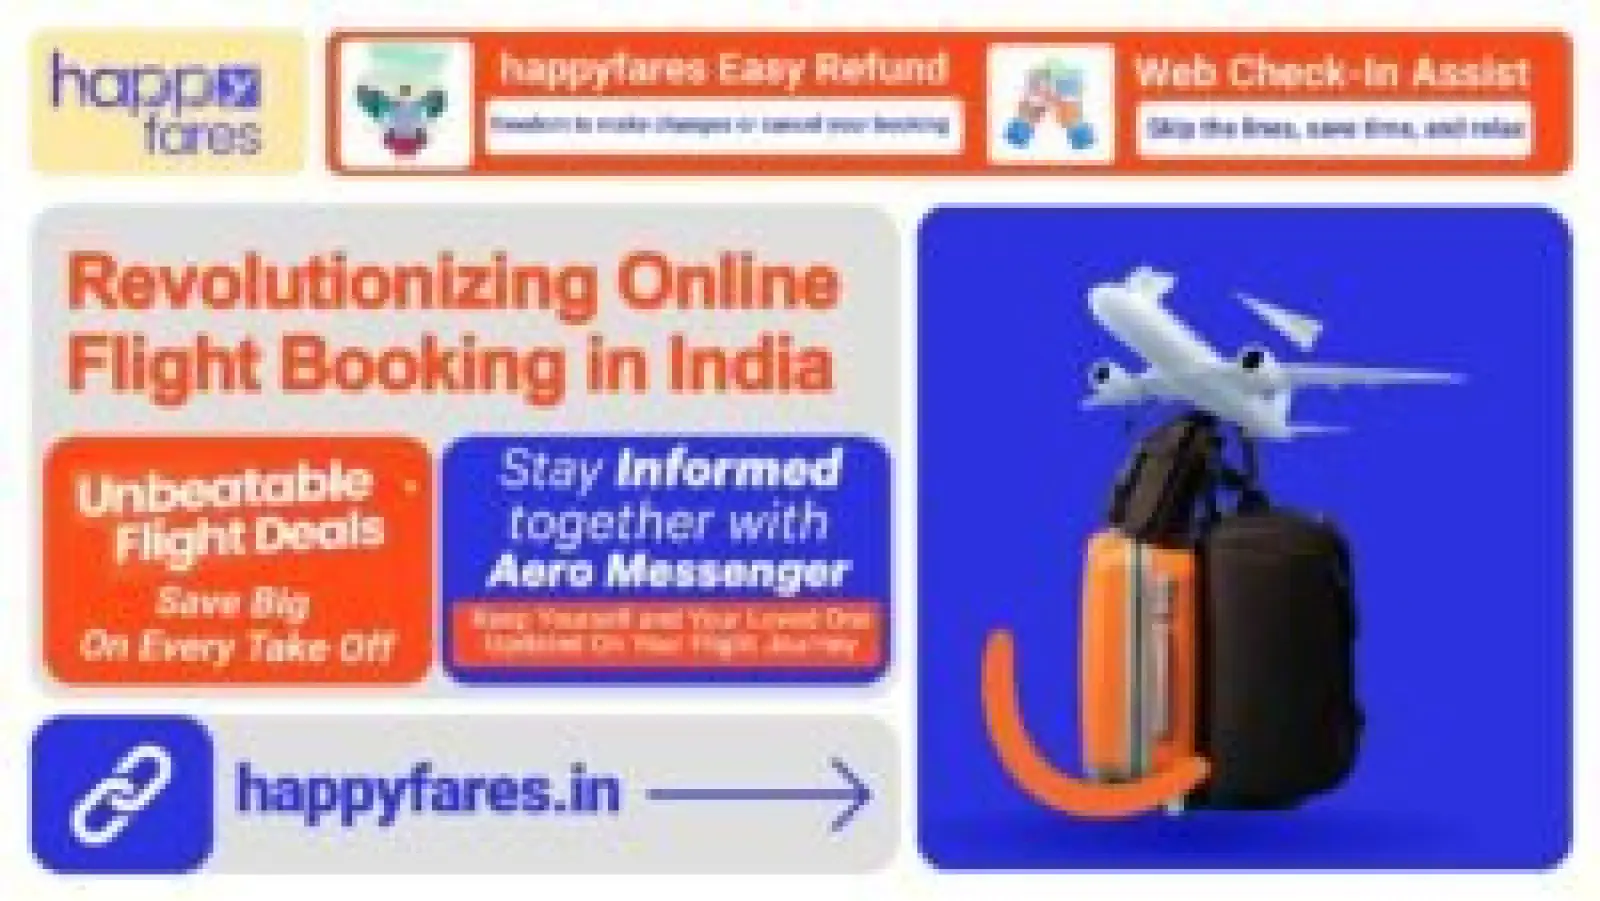 Happyfares Takes the Lead in Revolutionizing Online Travel Booking in India